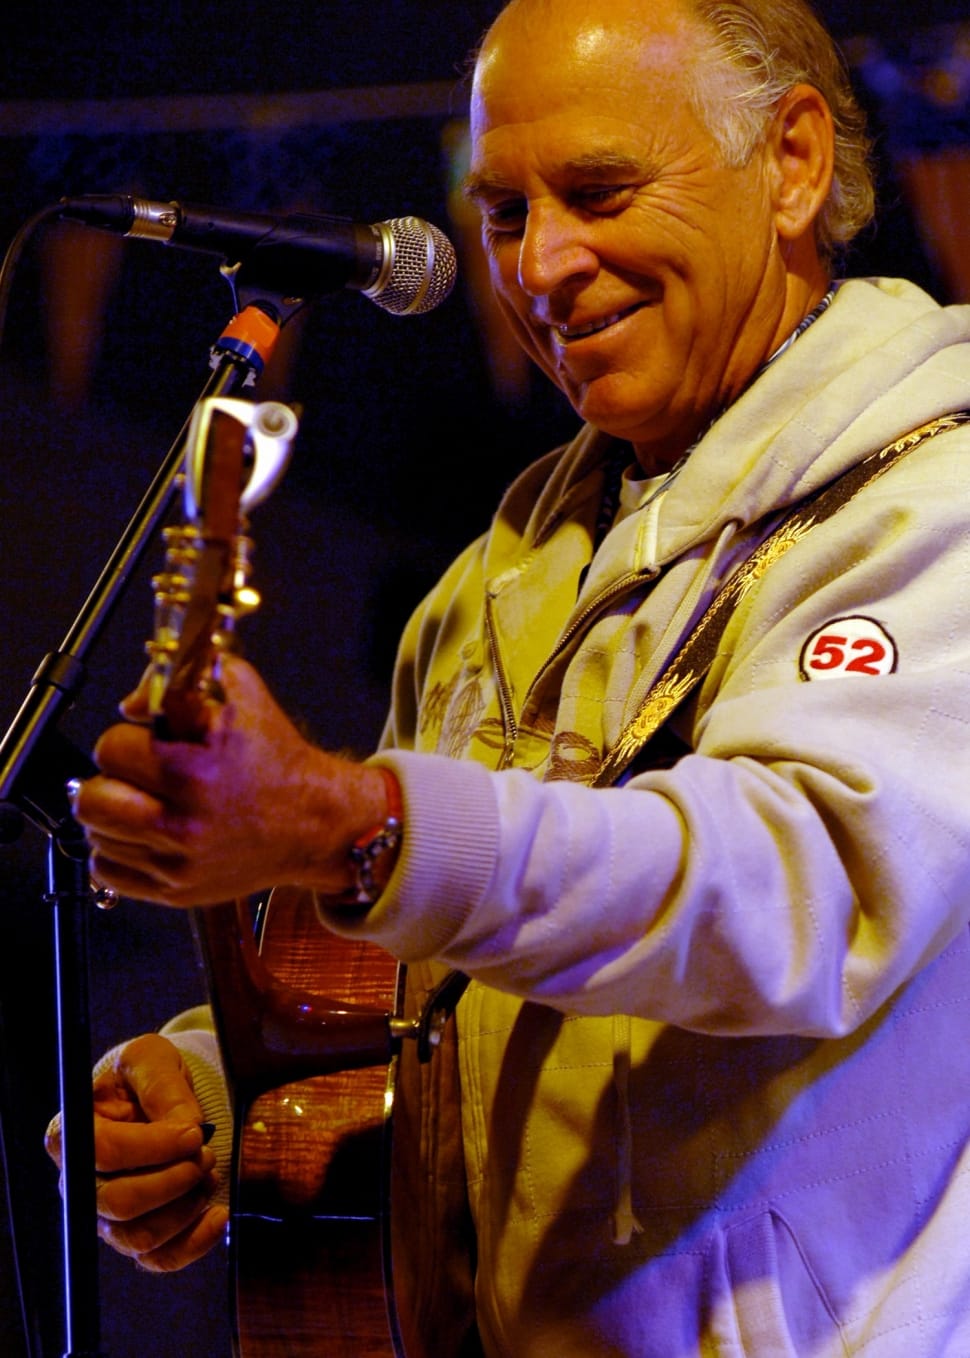 Singer, Jimmy Buffet, Guitarist, music, one person preview